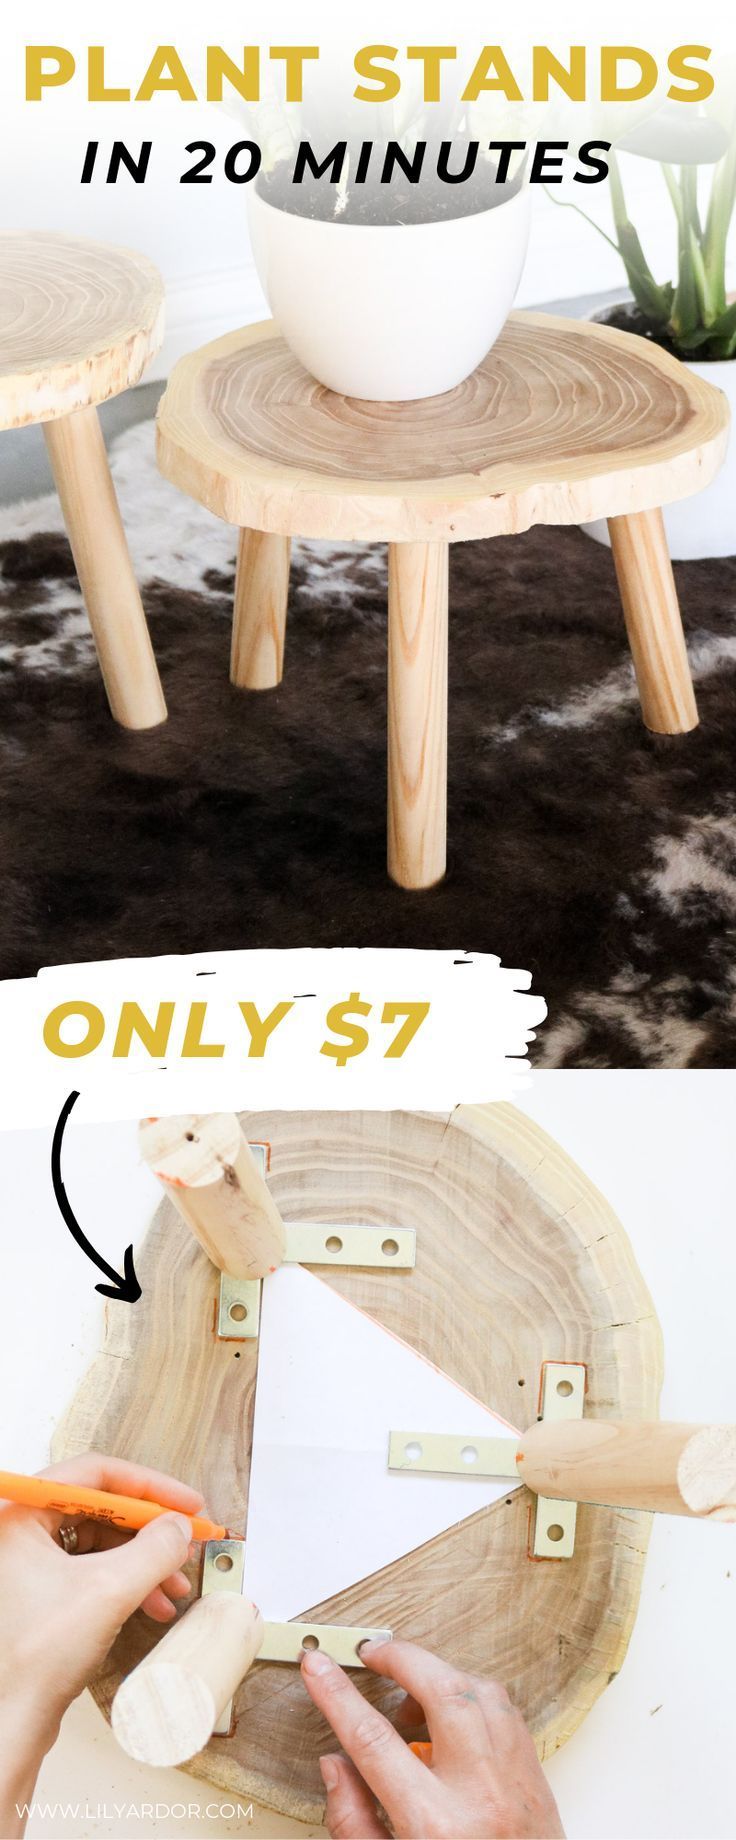 DIY Plant STANDS FOR $7-QUICK AND EASY! WOOD PLANTS STANDS -   18 plants Stand simple ideas